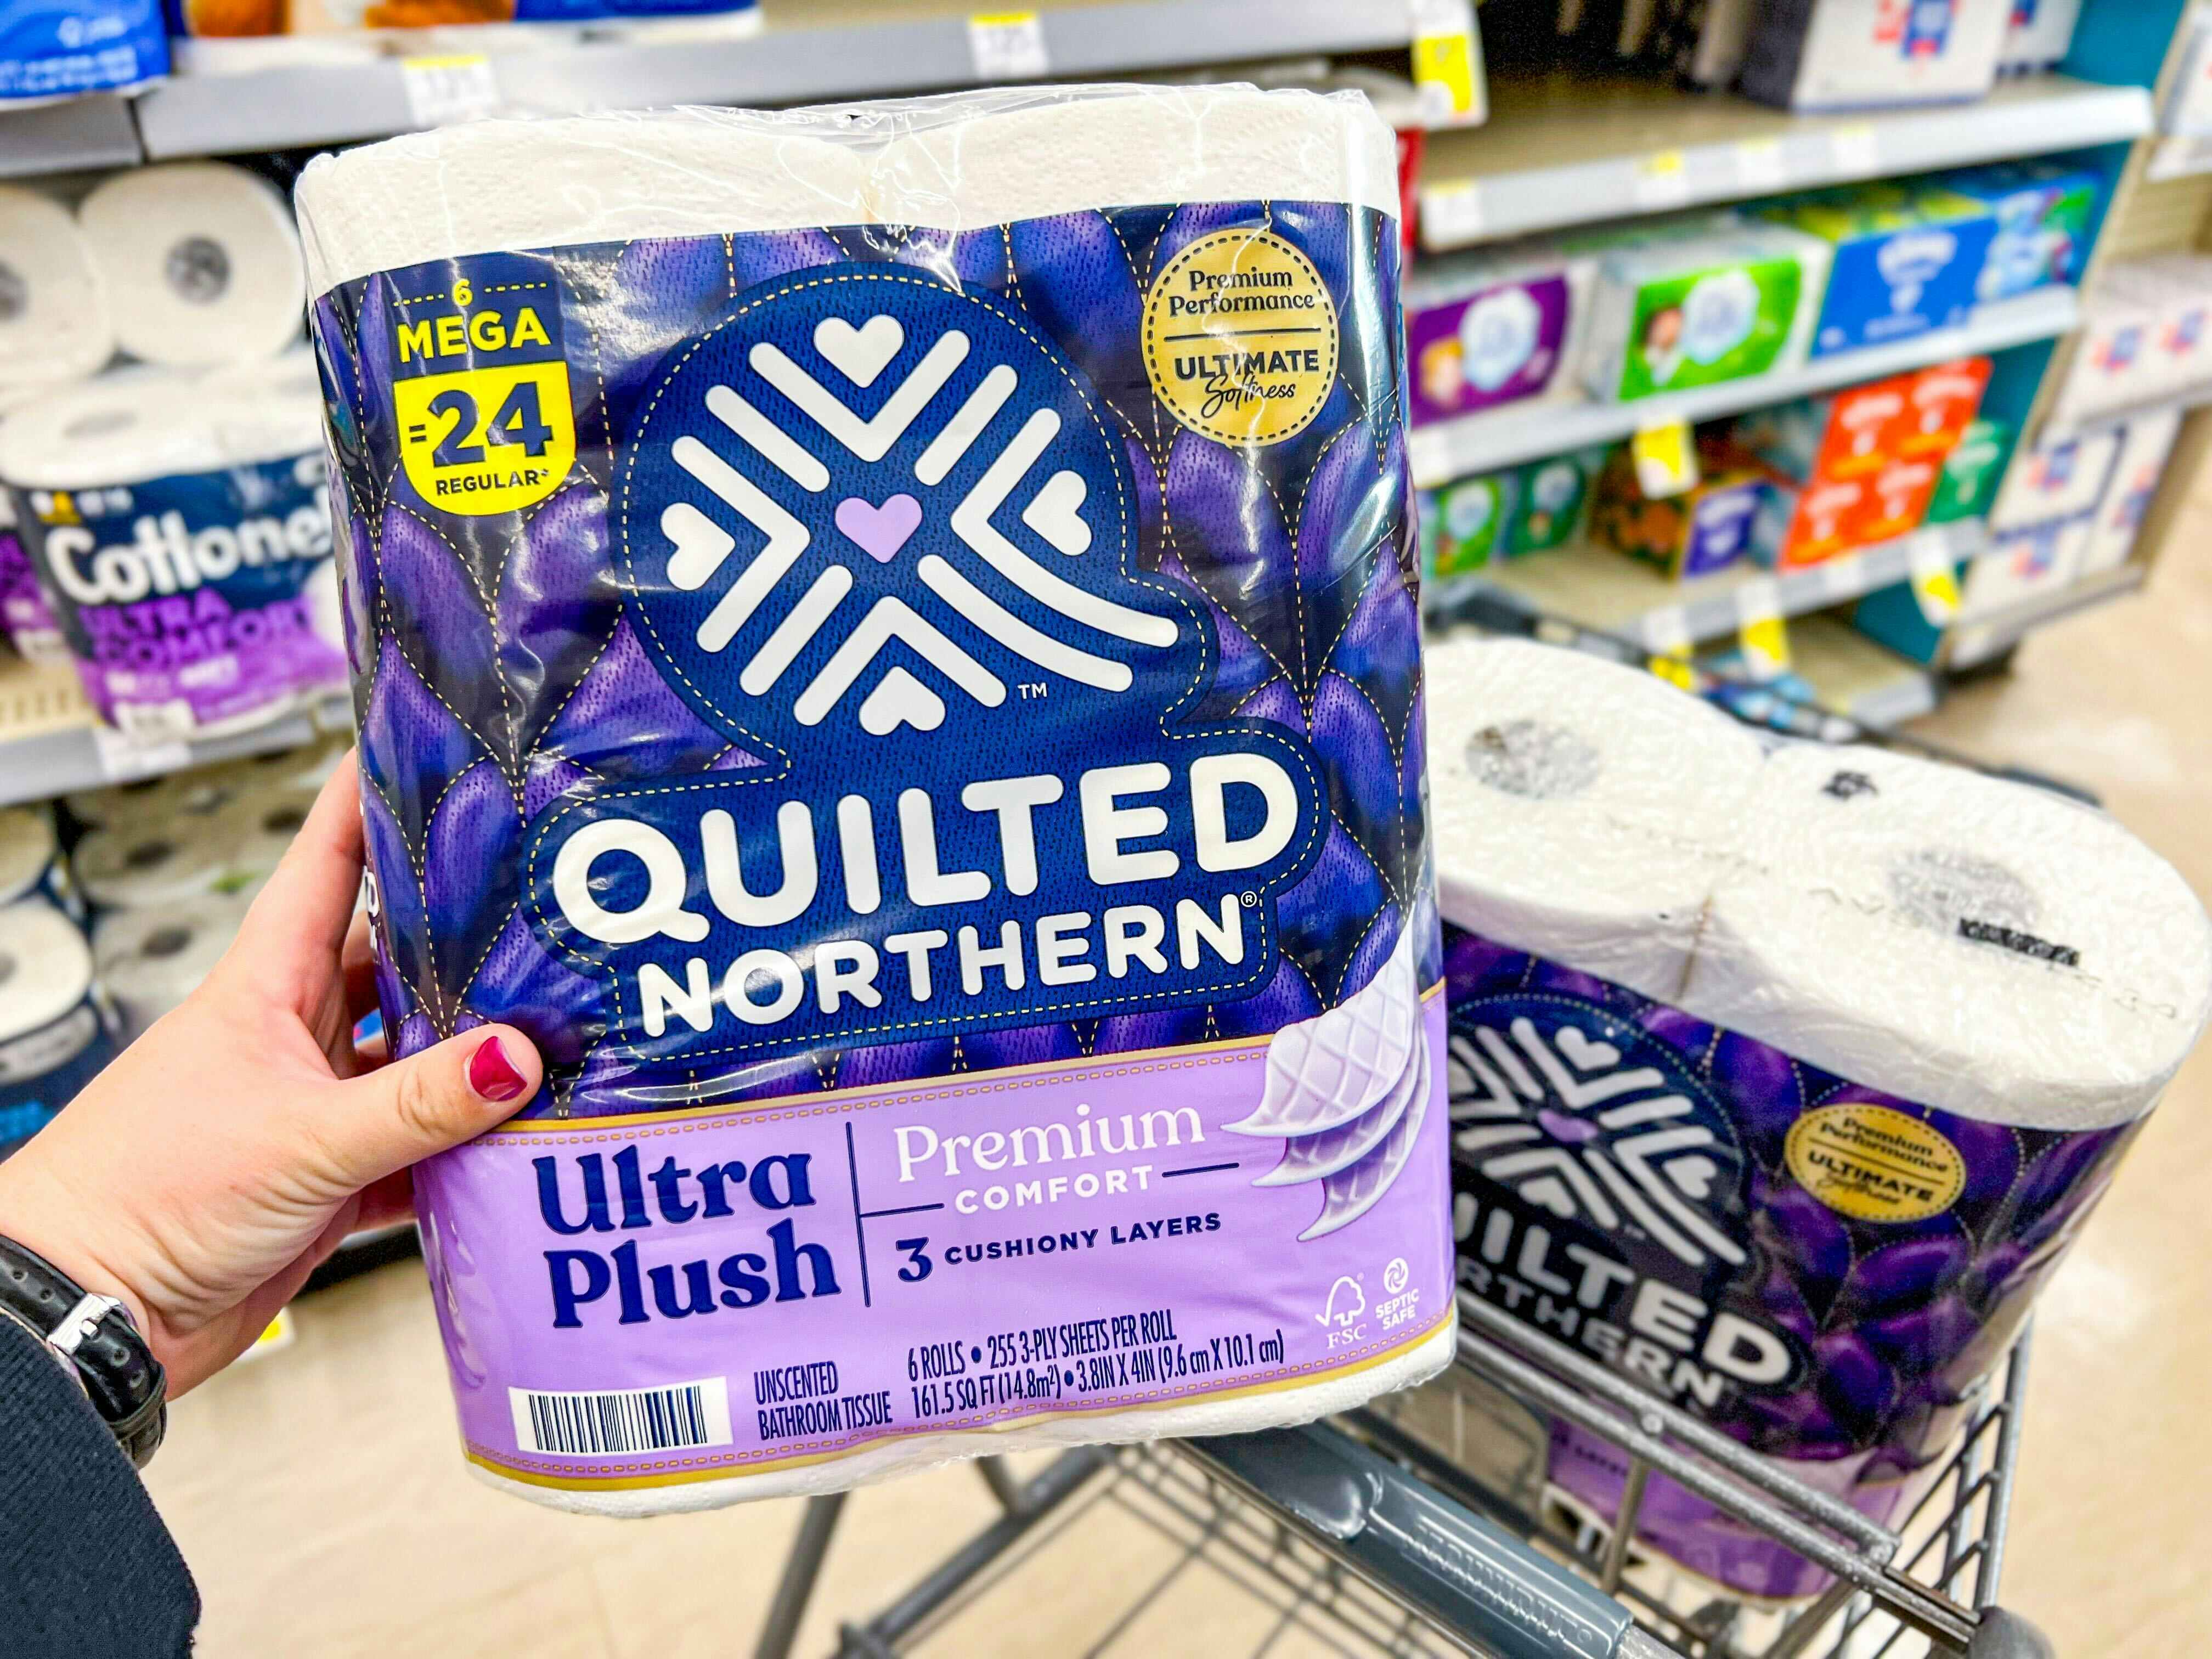 Quilted Northern Ultra Plush Toilet Paper, as Low as $4.89 on Amazon